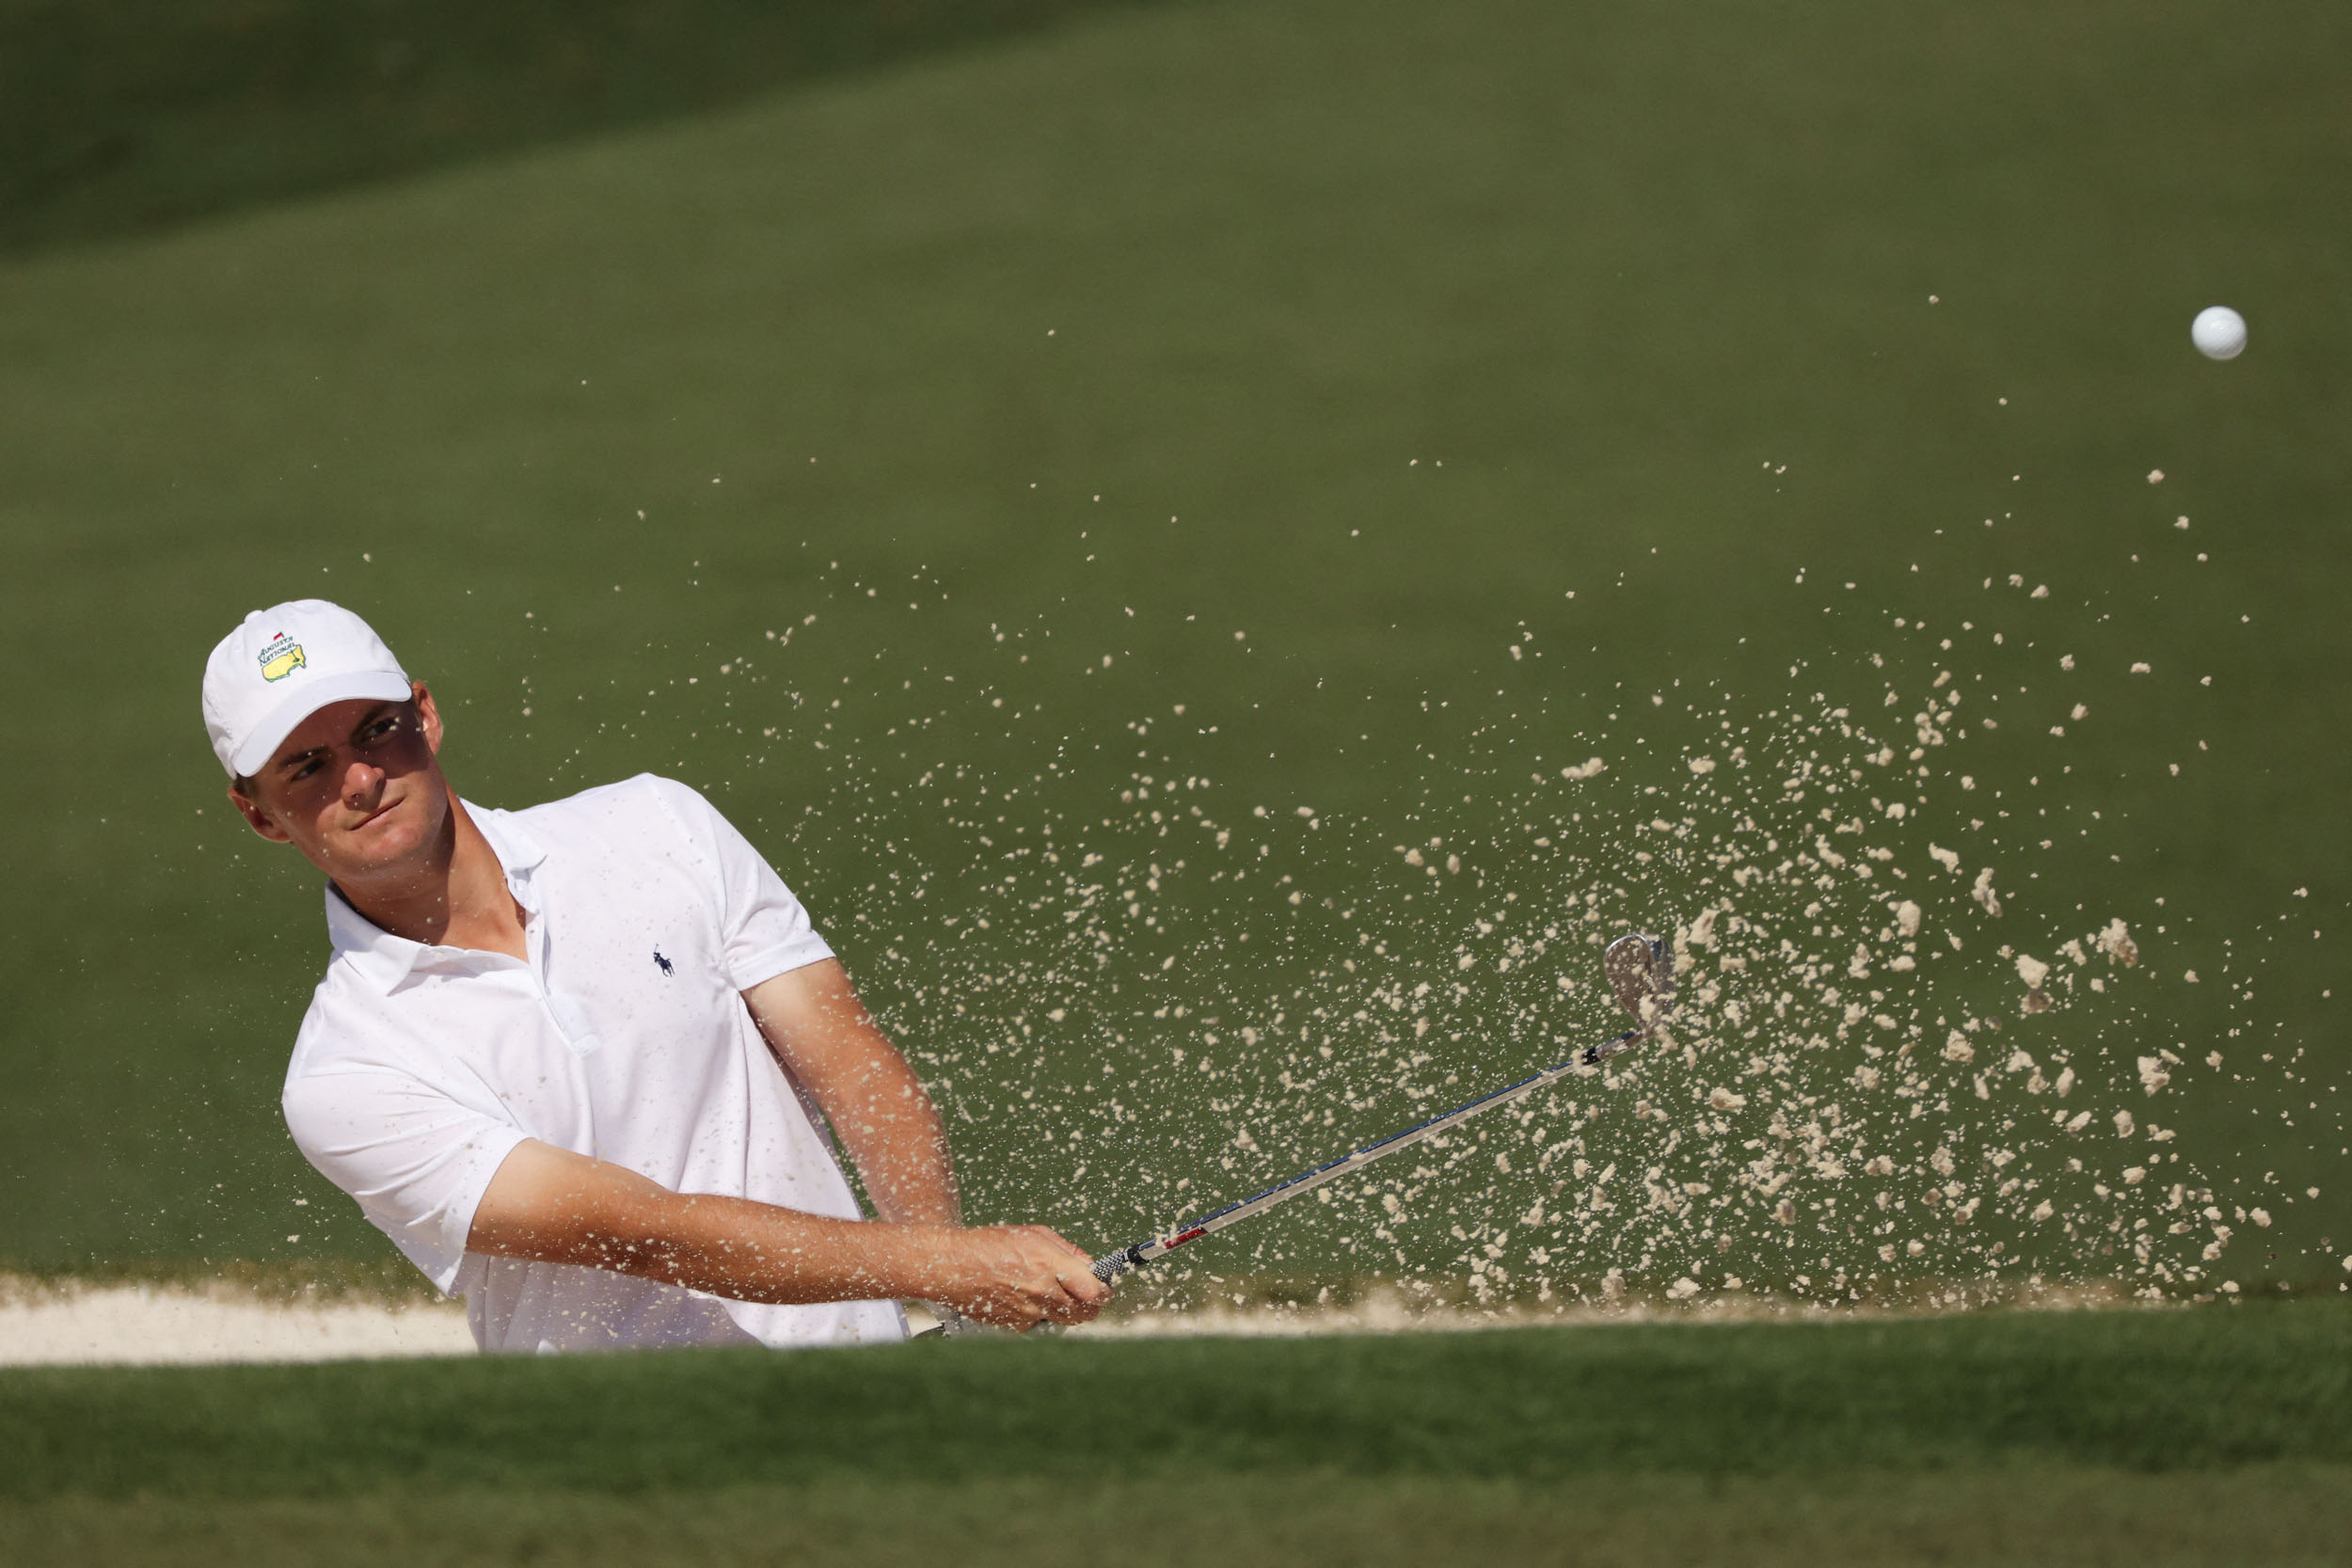 AUGUSTA, GEORGIA - APRIL 05: Amatduring a practice round prior to the Masters at Augusta National Golf Club on April 05, 2021 in Augusta, Georgia. Kevin C. Cox/Getty Images/AFP (Photo by Kevin C. Cox / GETTY IMAGES NORTH AMERICA / Getty Images via AFP)